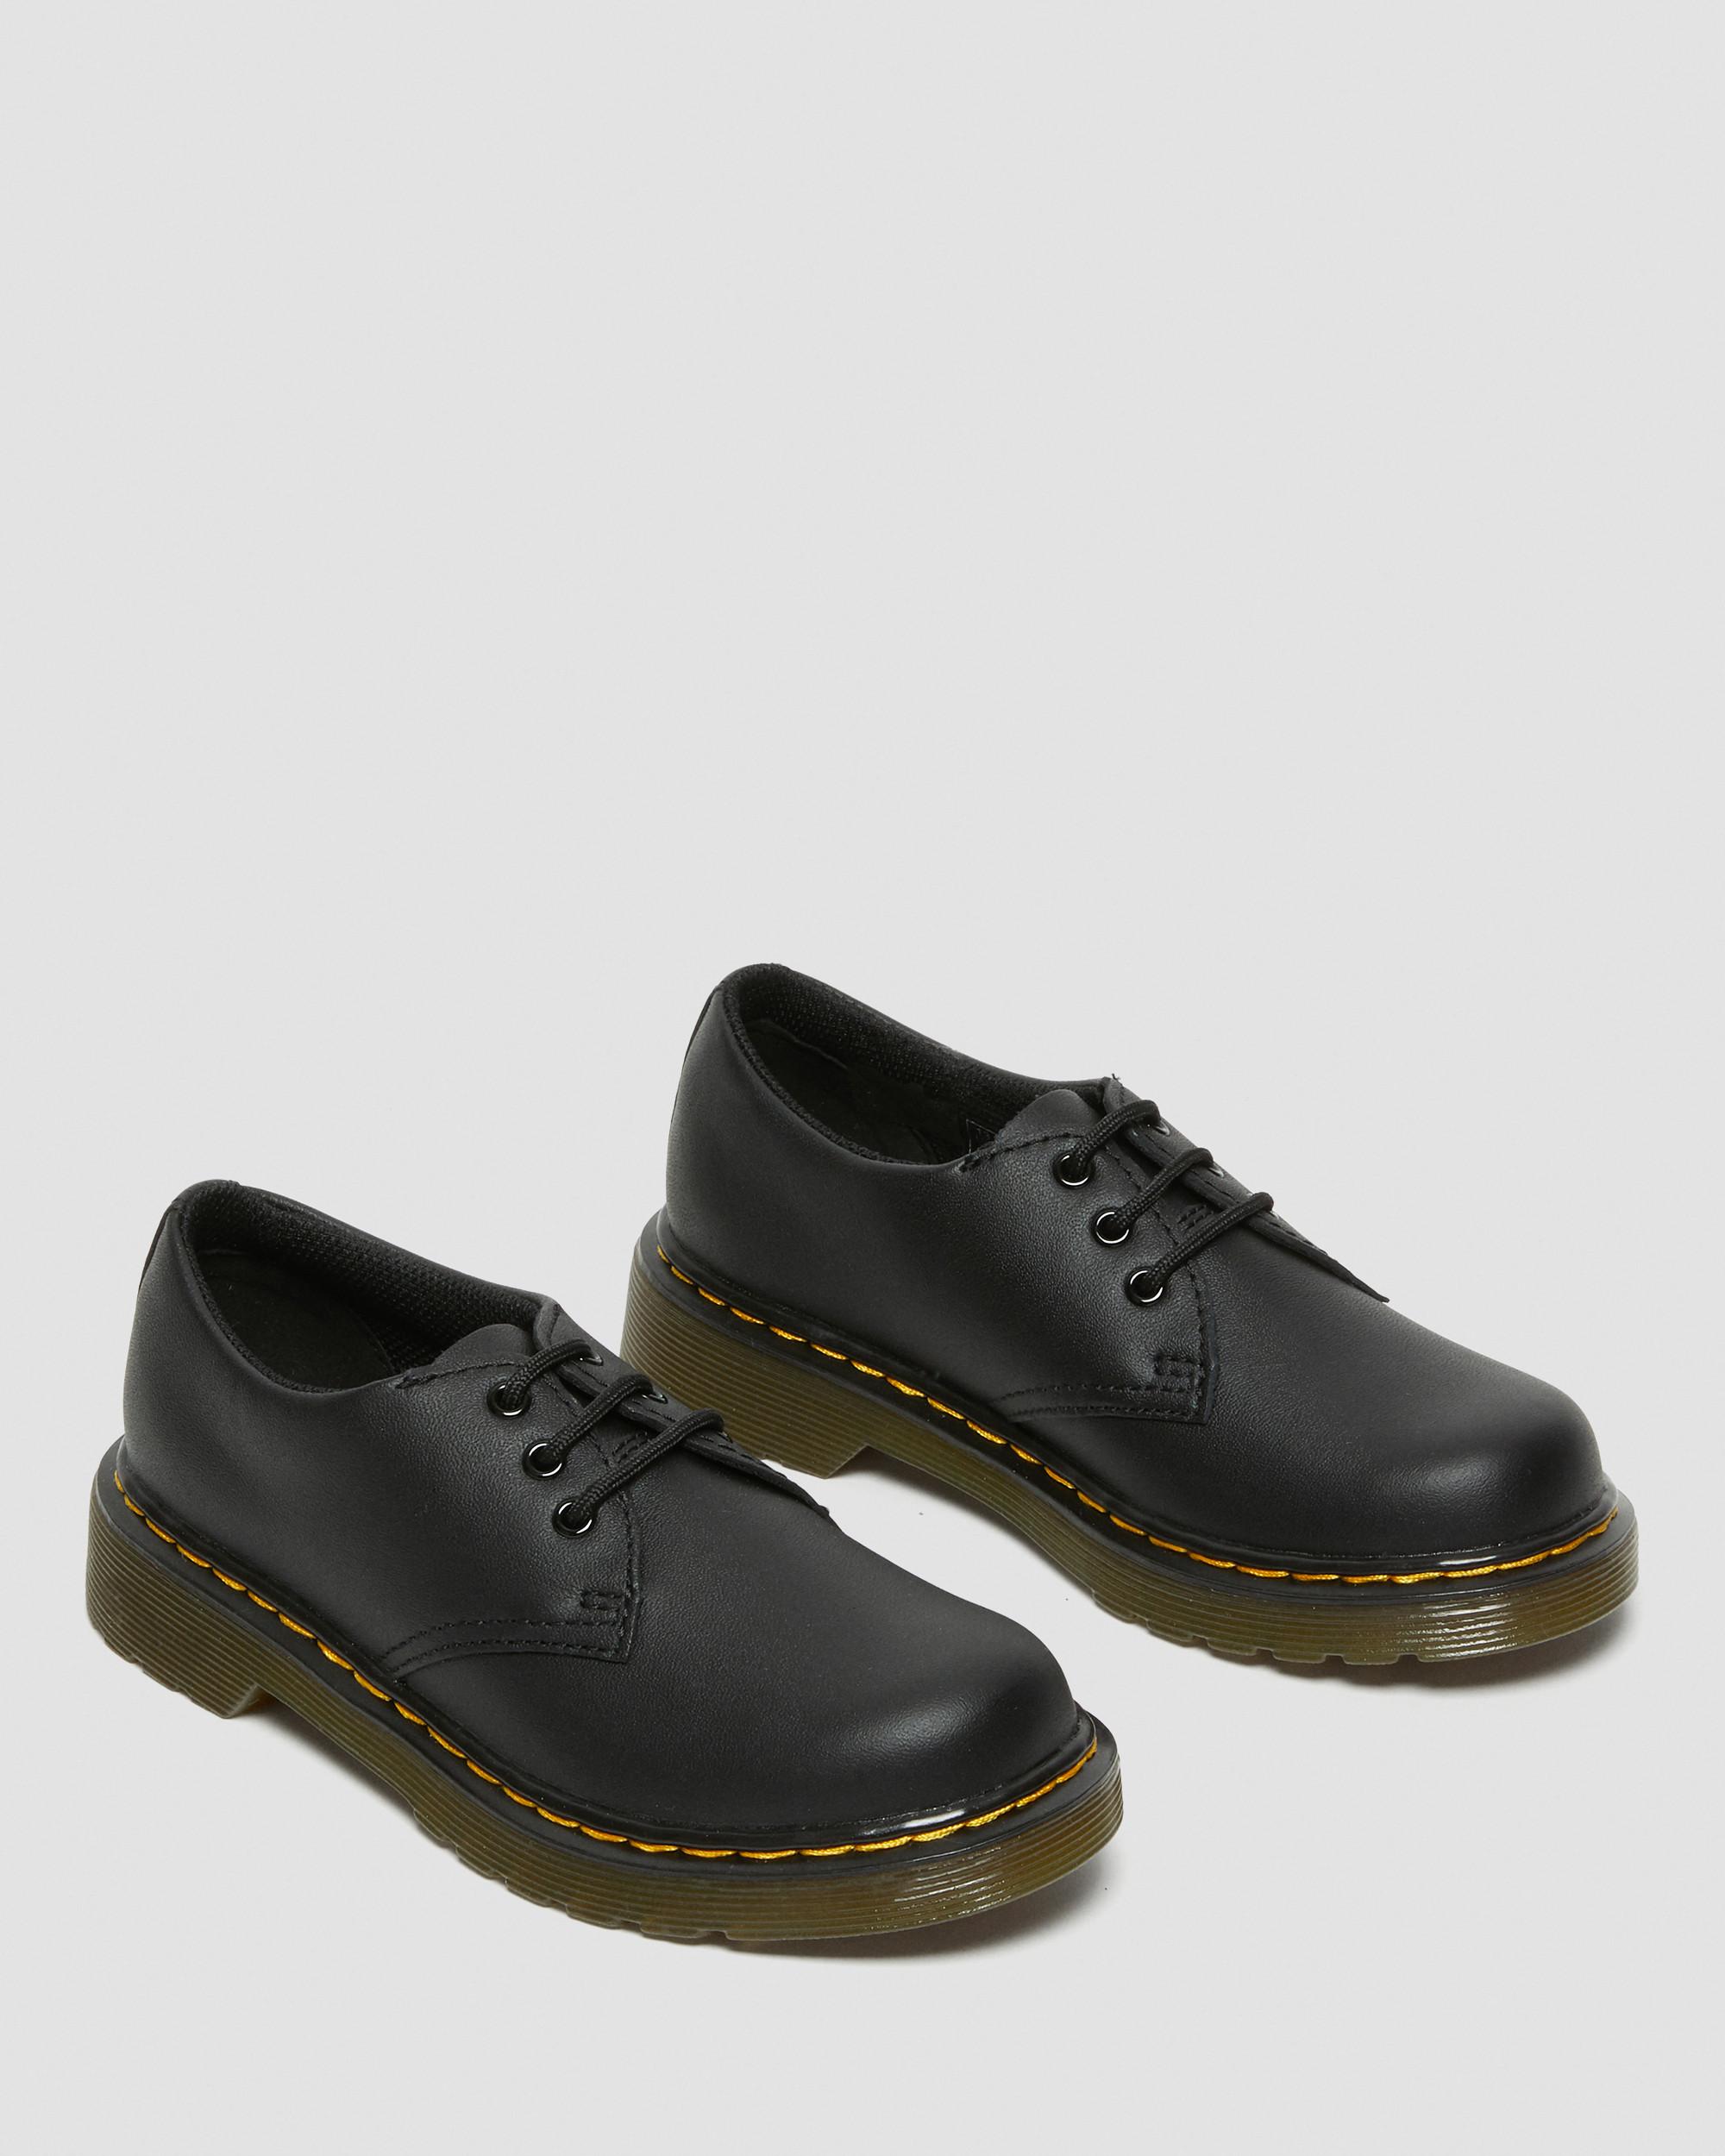 Junior 1461 Softy T Leather Shoes in Black